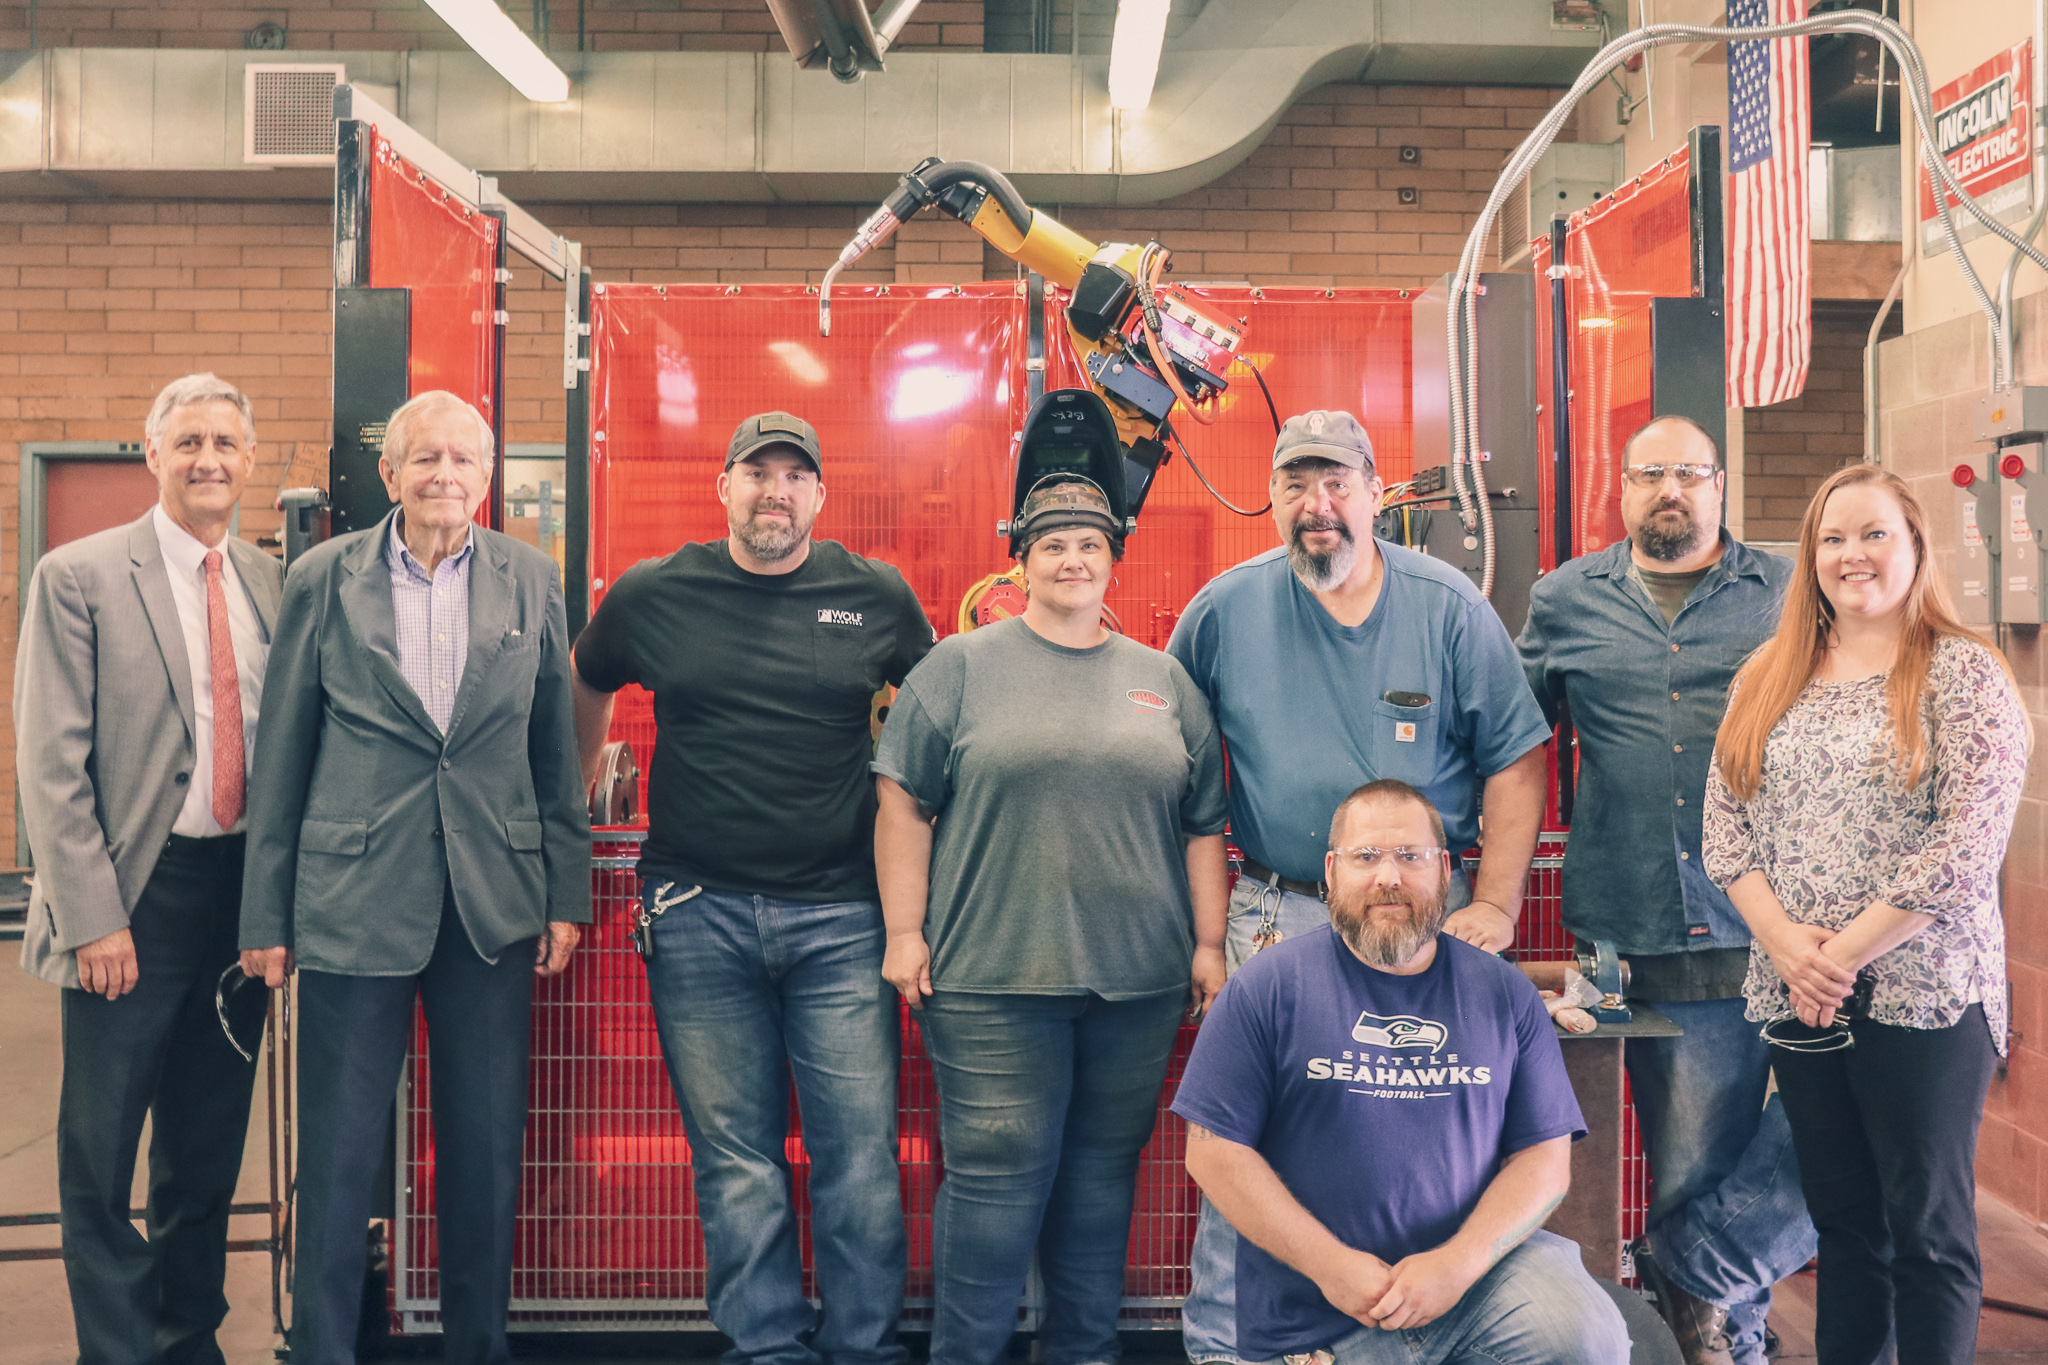 Welding class with RTC President, Mr. Piggot, and others in front of the welding robot